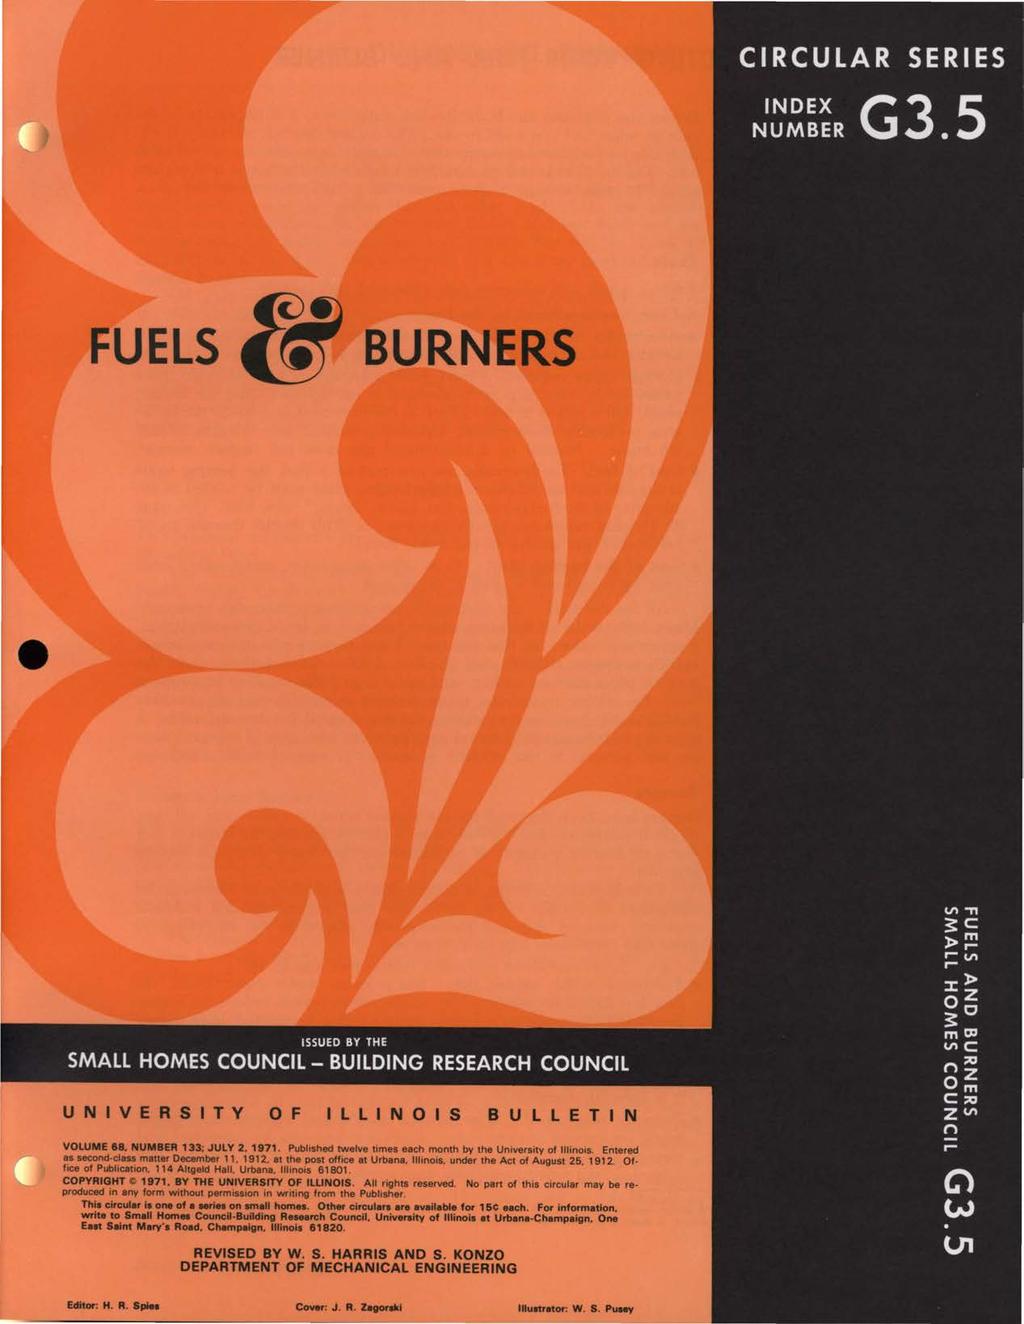 FUELS BURNERS UNIVERSITY 0 F ILLINOIS BULLETIN VOLUME 68, NUMBER 133; JULY 2, 1971. Publ ished twelve times each month by the Un1versity of Illinois. Entered as second-class matter December 1 1, 1912.